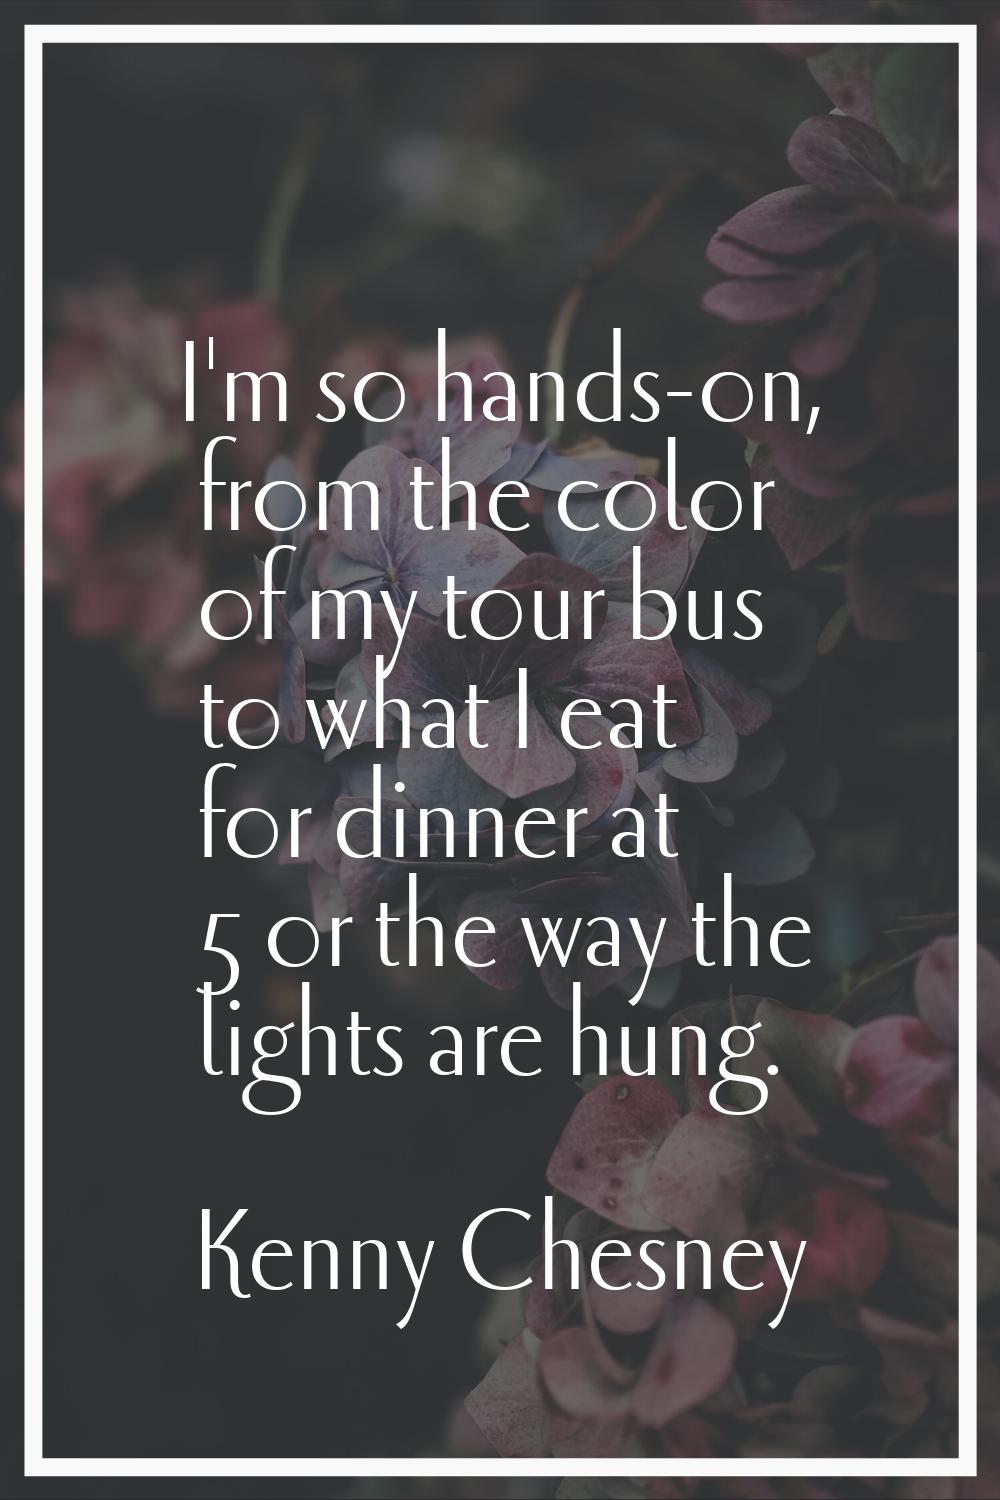 I'm so hands-on, from the color of my tour bus to what I eat for dinner at 5 or the way the lights 